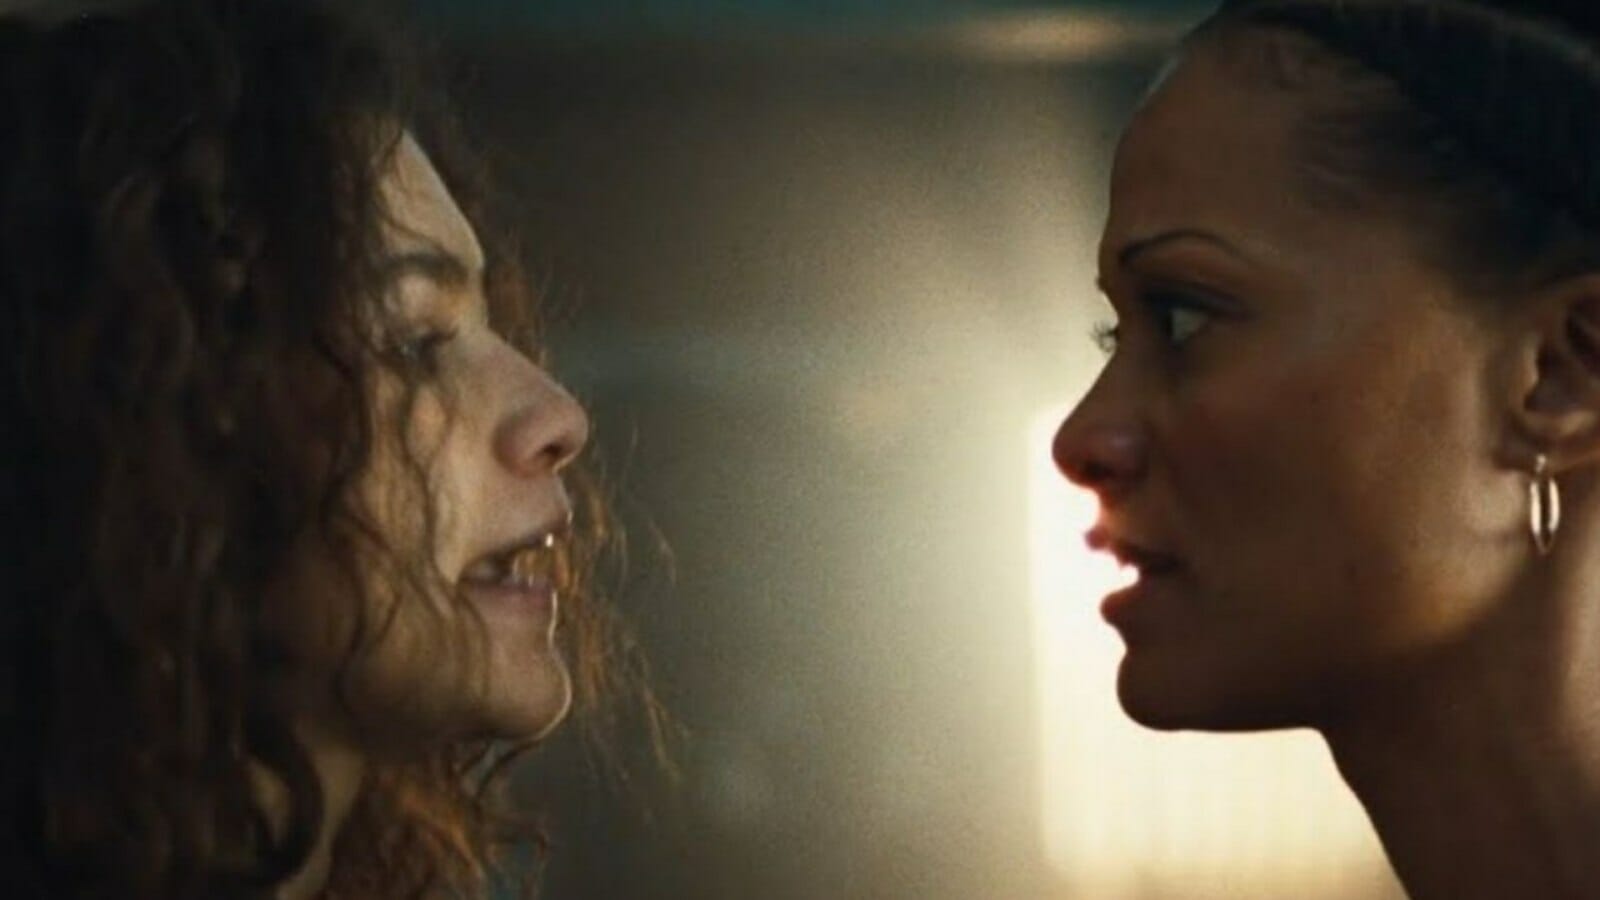 Rue's mother confronts her